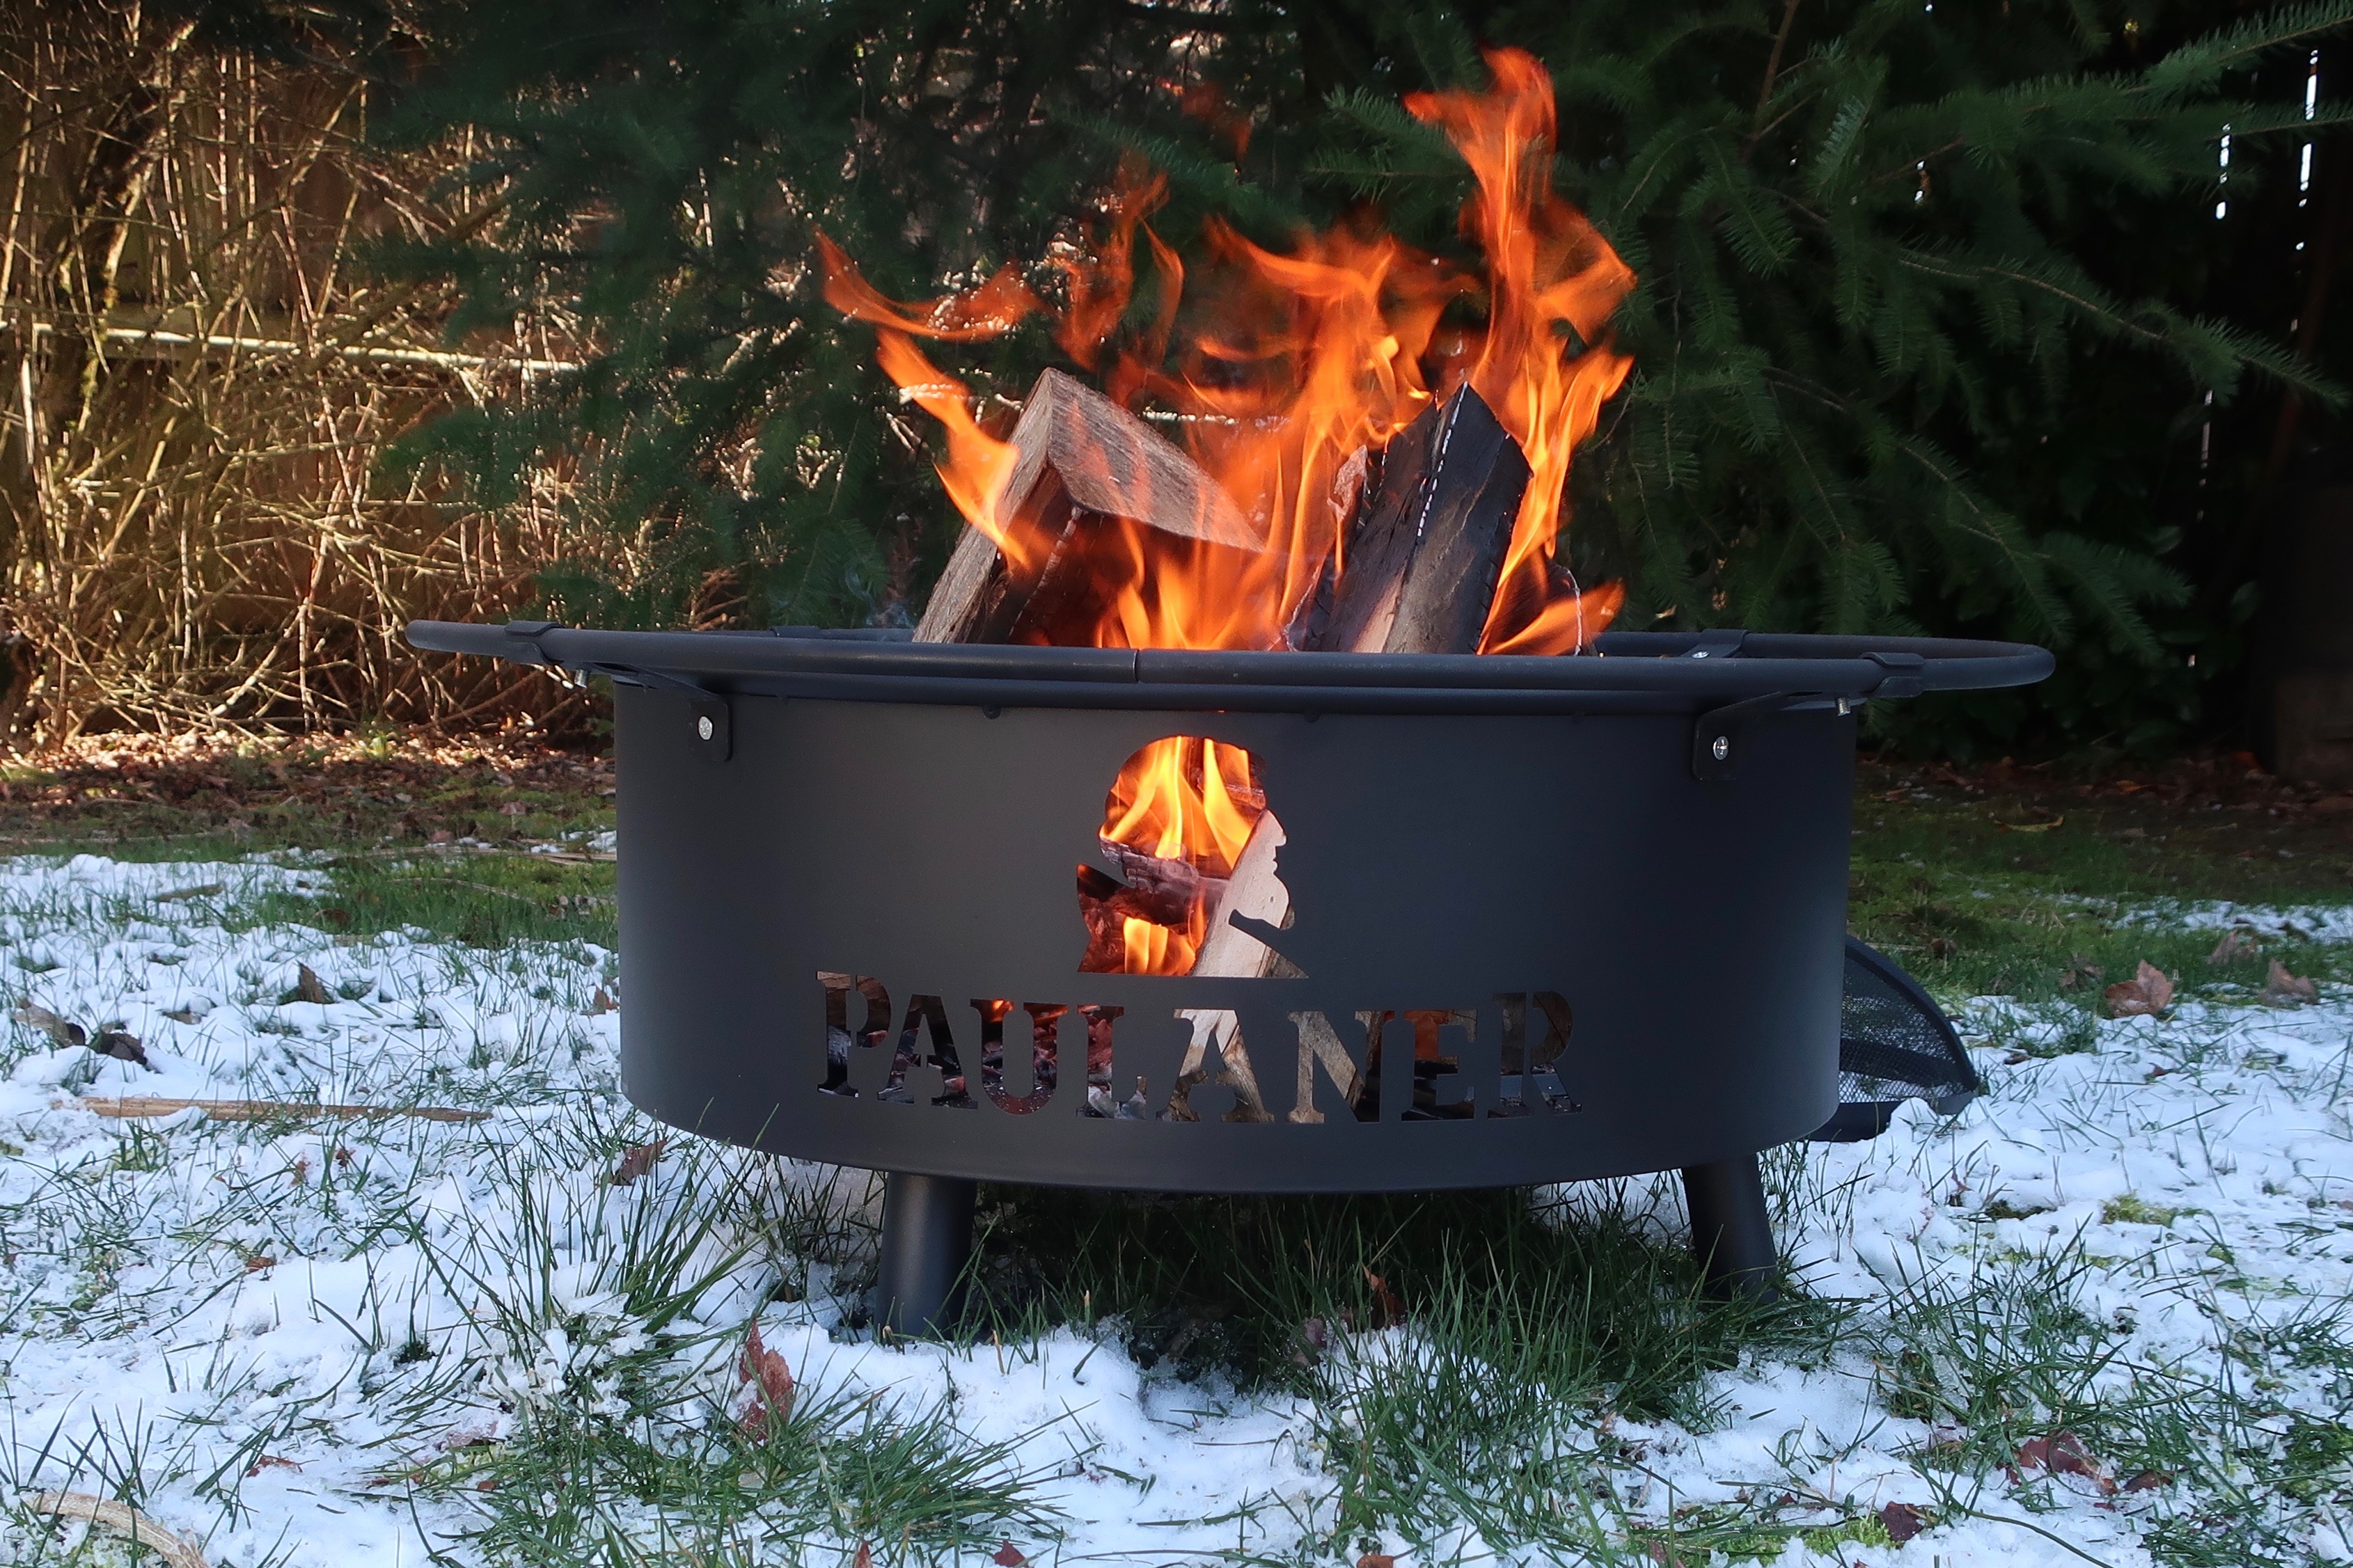 You can win this Paulaner Fire Pit by texting PAULANERHAUS to 484848.